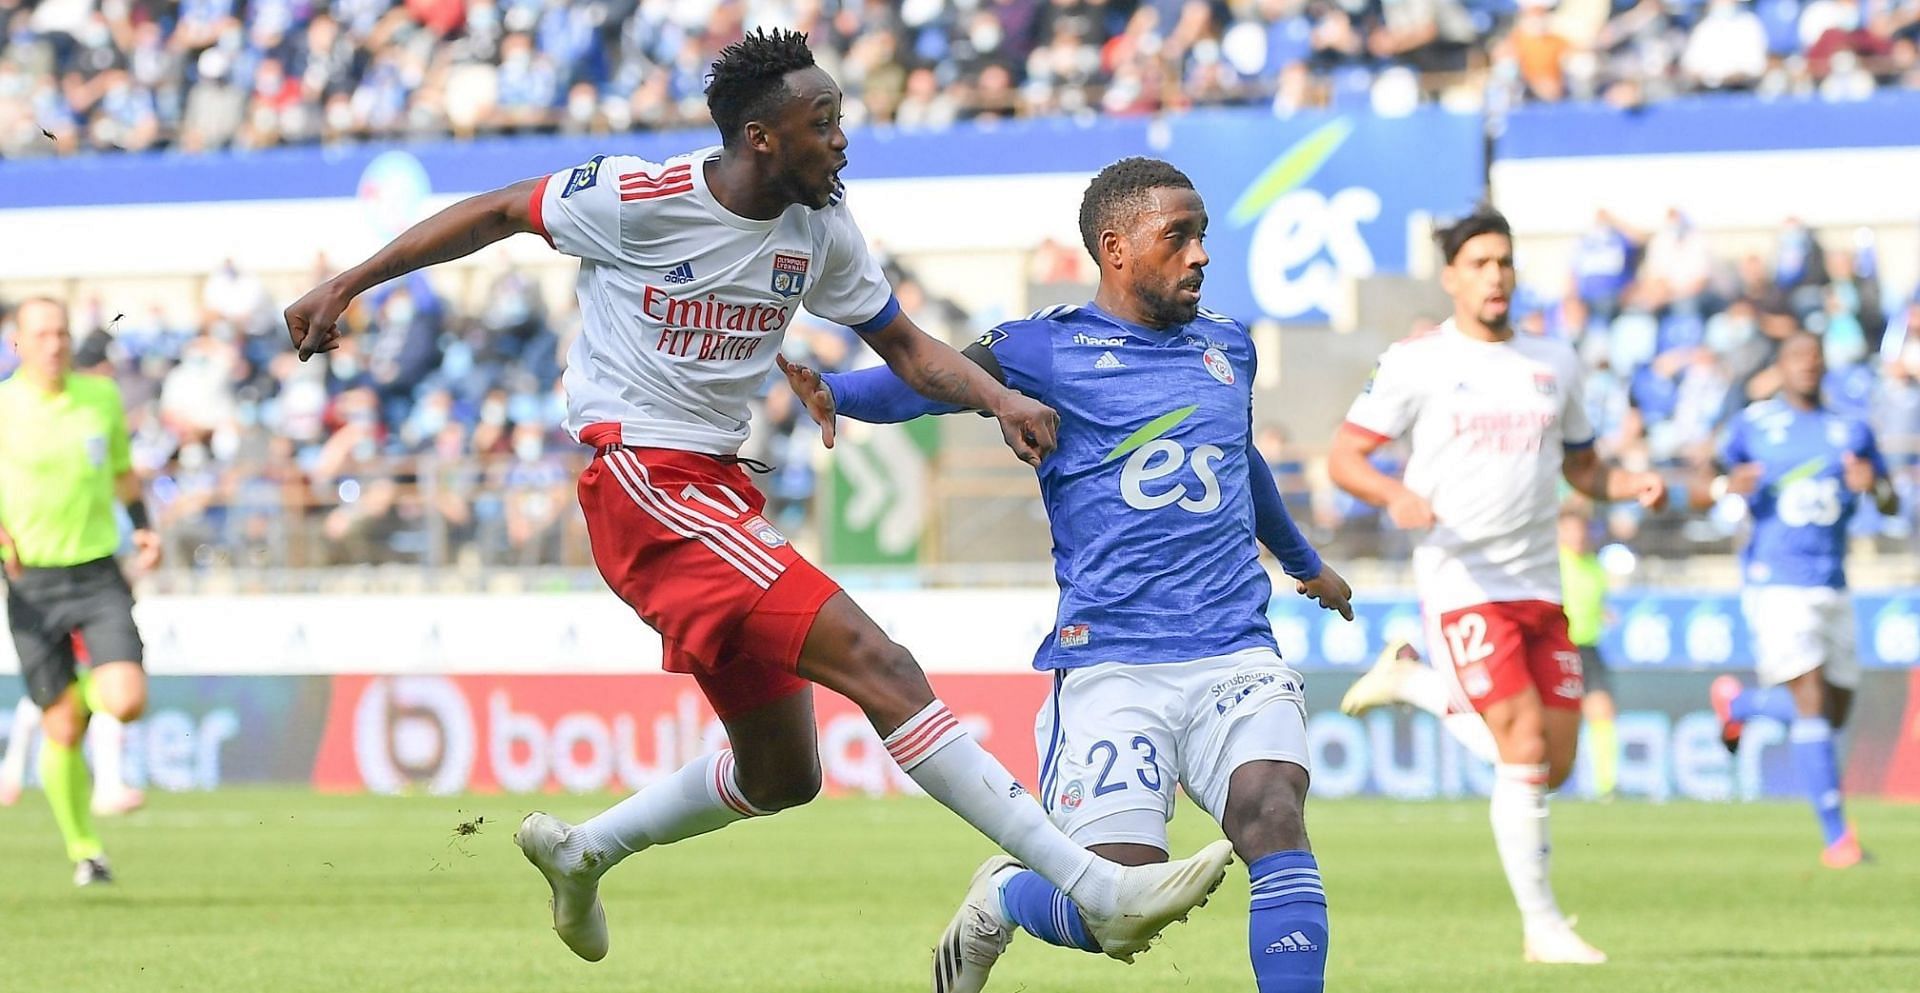 Lyon and Strasbourg will go head-to-head in the Ligue 1 on Saturday